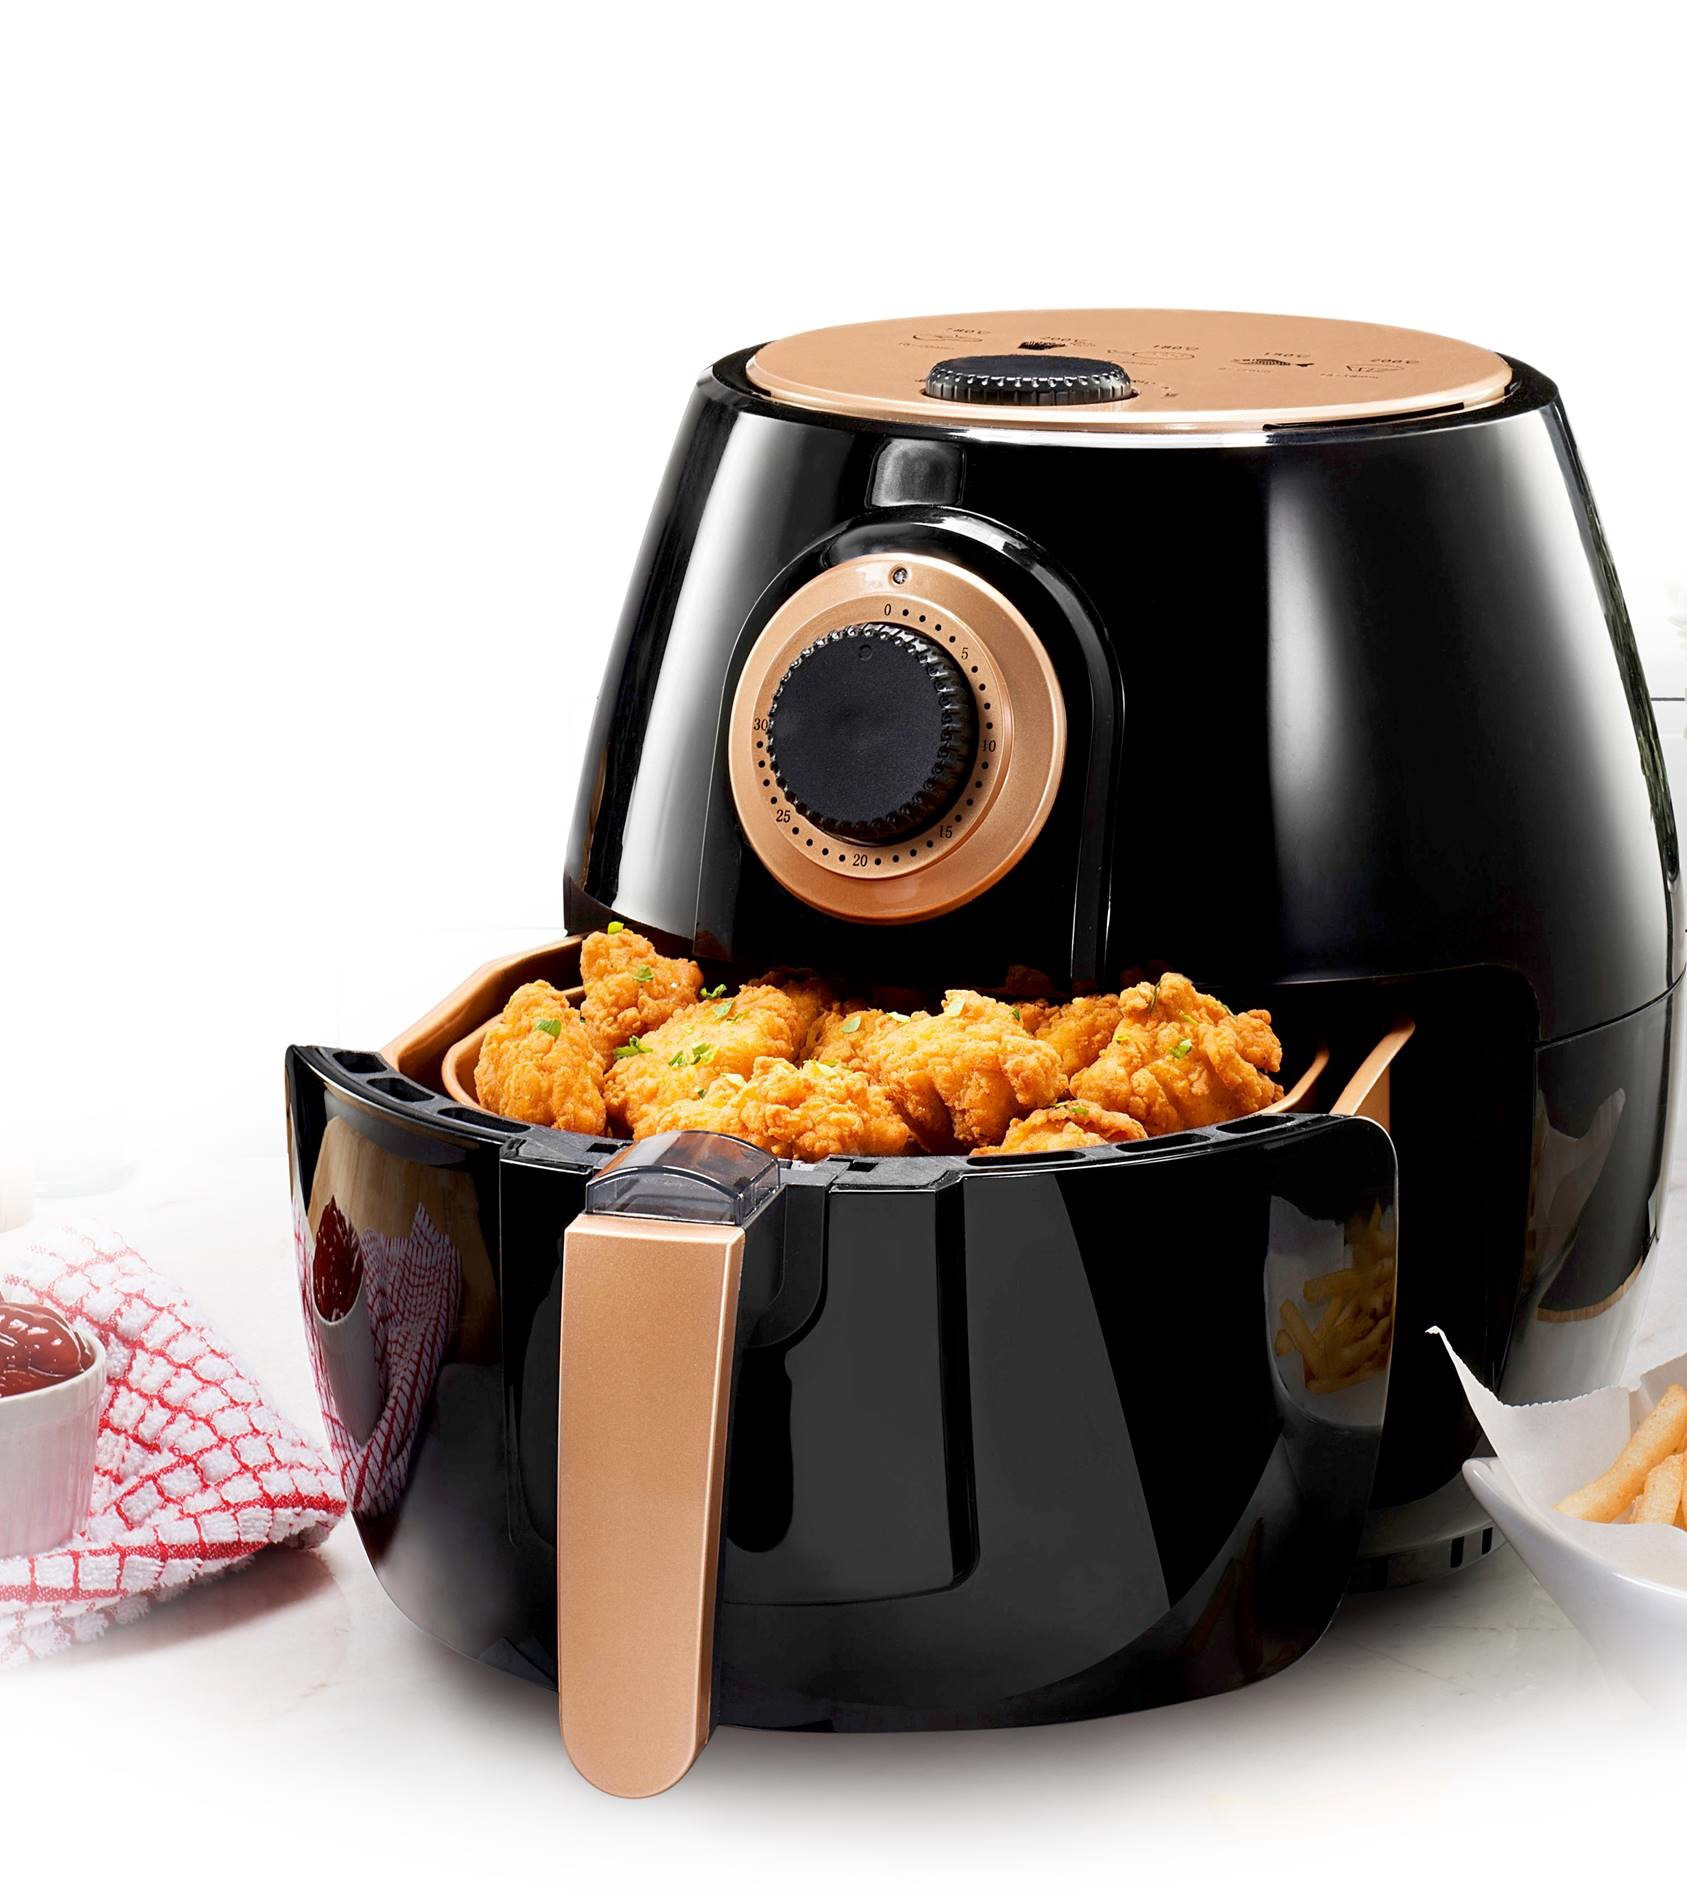 Oster Copper-Infused DuraCeramic 3.3-Quart Air Fryer (Used)